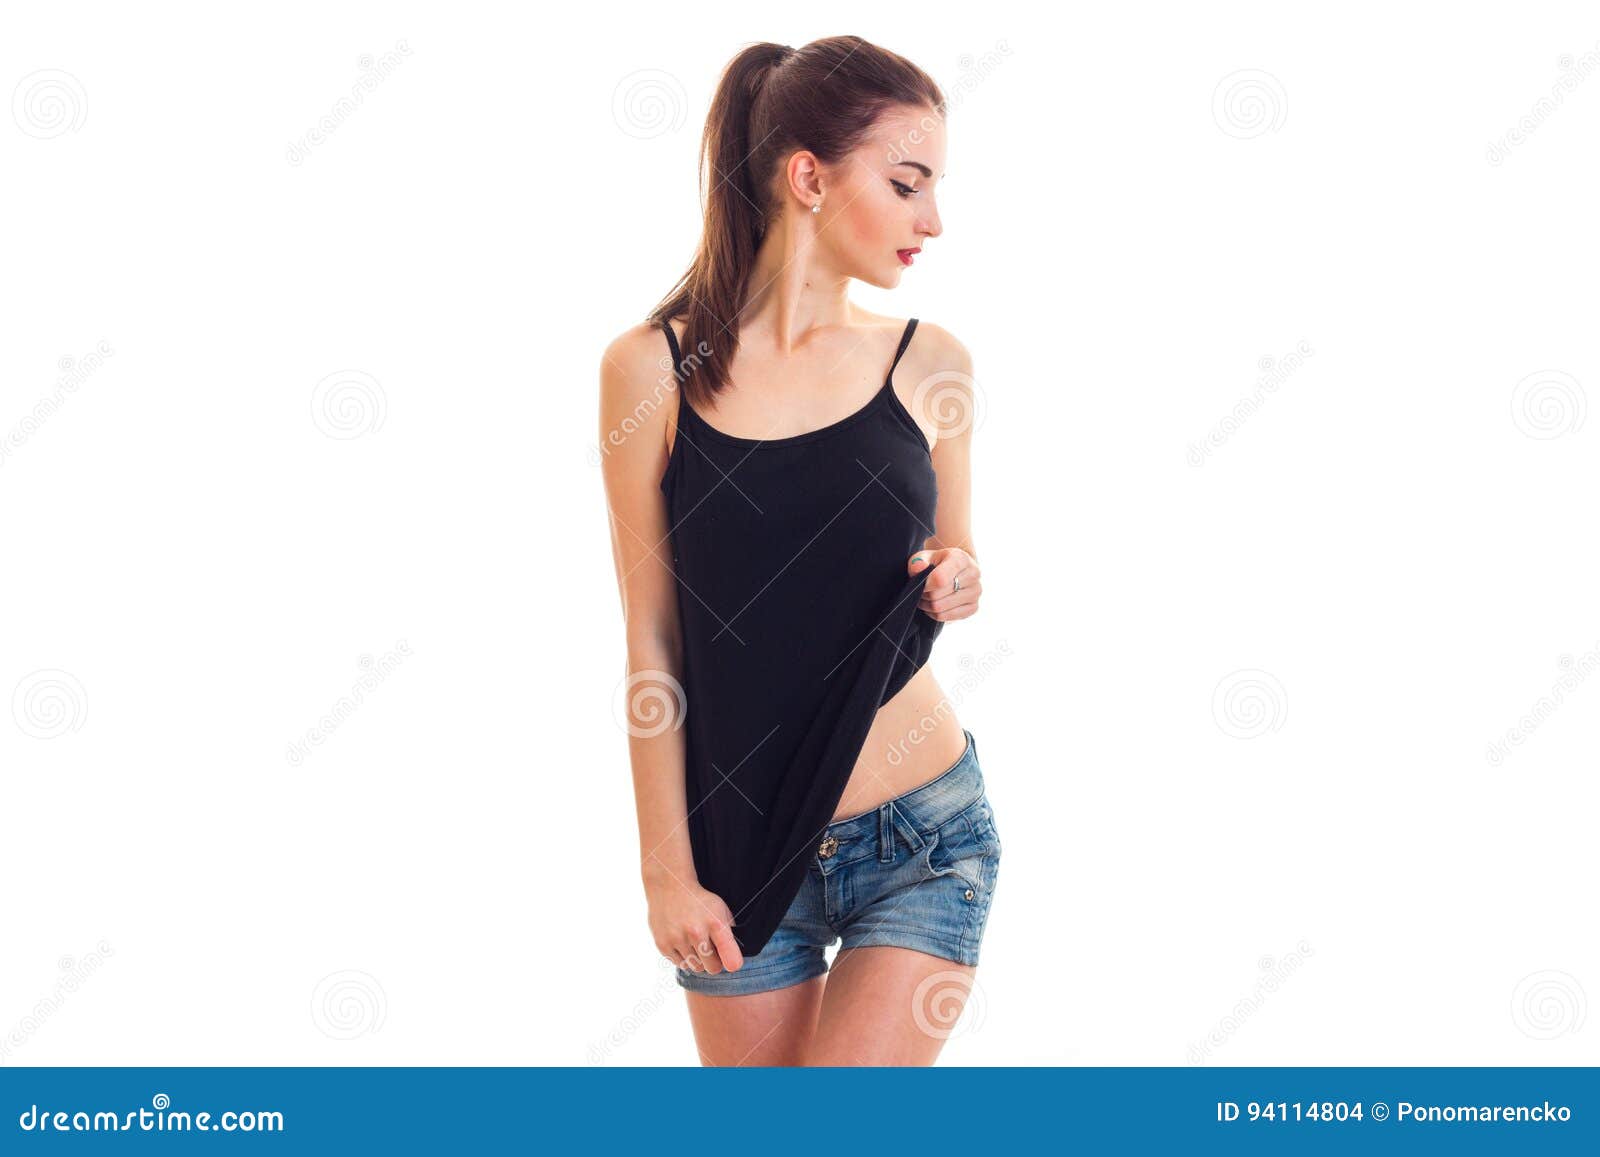 training Supple Bookstore shirt without bra In response to the Required ...